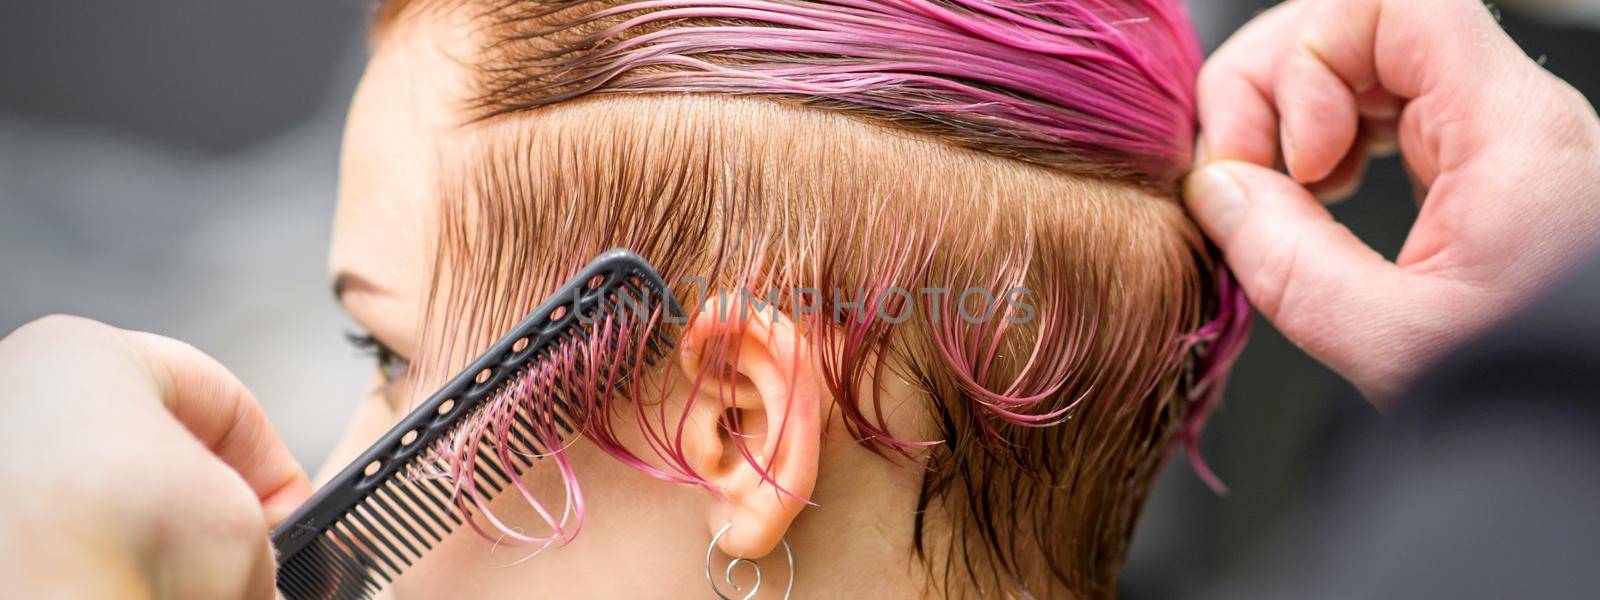 Combing the hair of a young woman during coloring hair in pink color at a hair salon close up. by okskukuruza